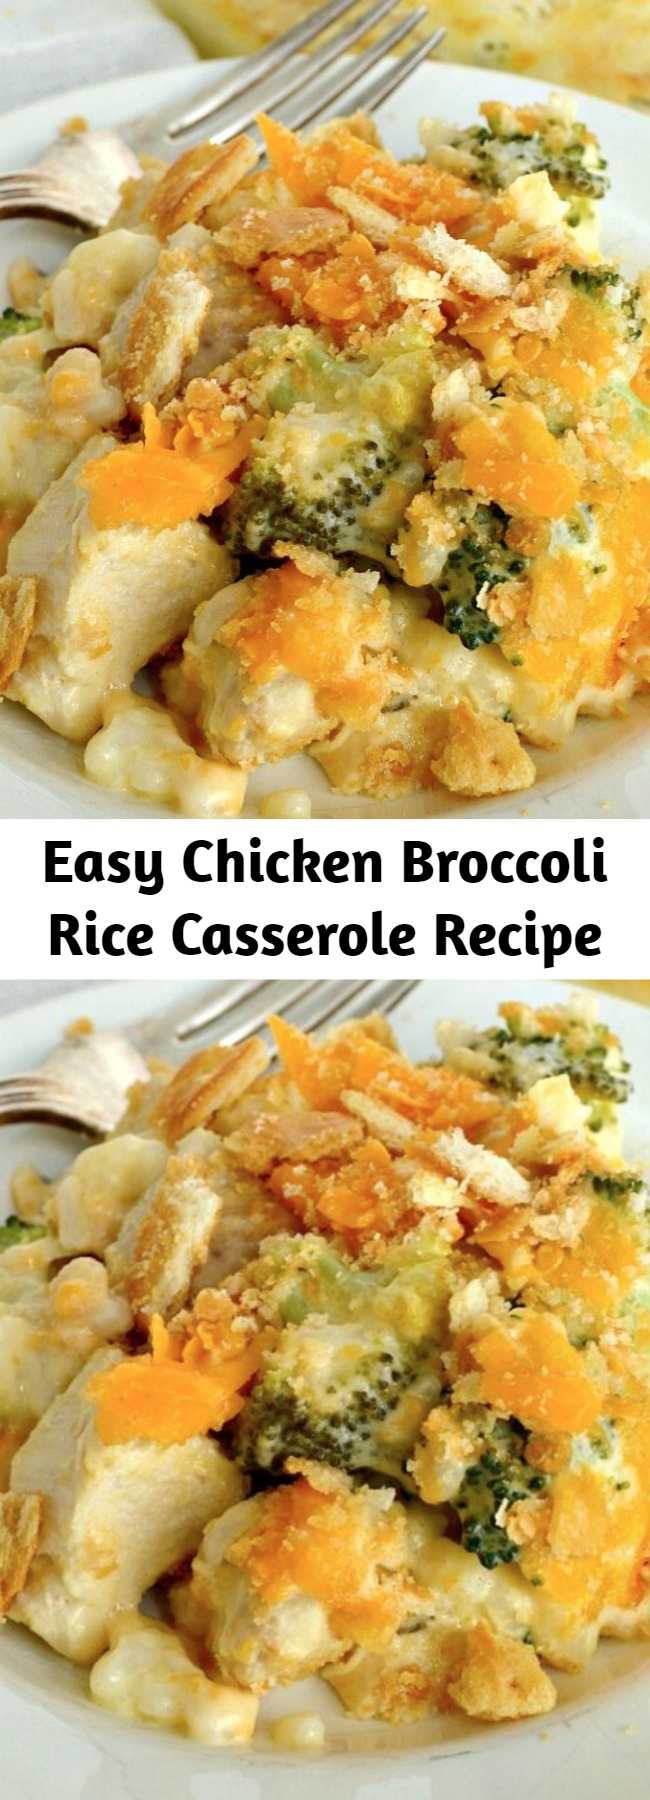 Easy Chicken Broccoli Rice Casserole Recipe - This amazing casserole is loaded with chunks of chicken breasts, fresh broccoli and rice in the creamiest, most flavorful sauce. Every bite is fabulous comfort food!